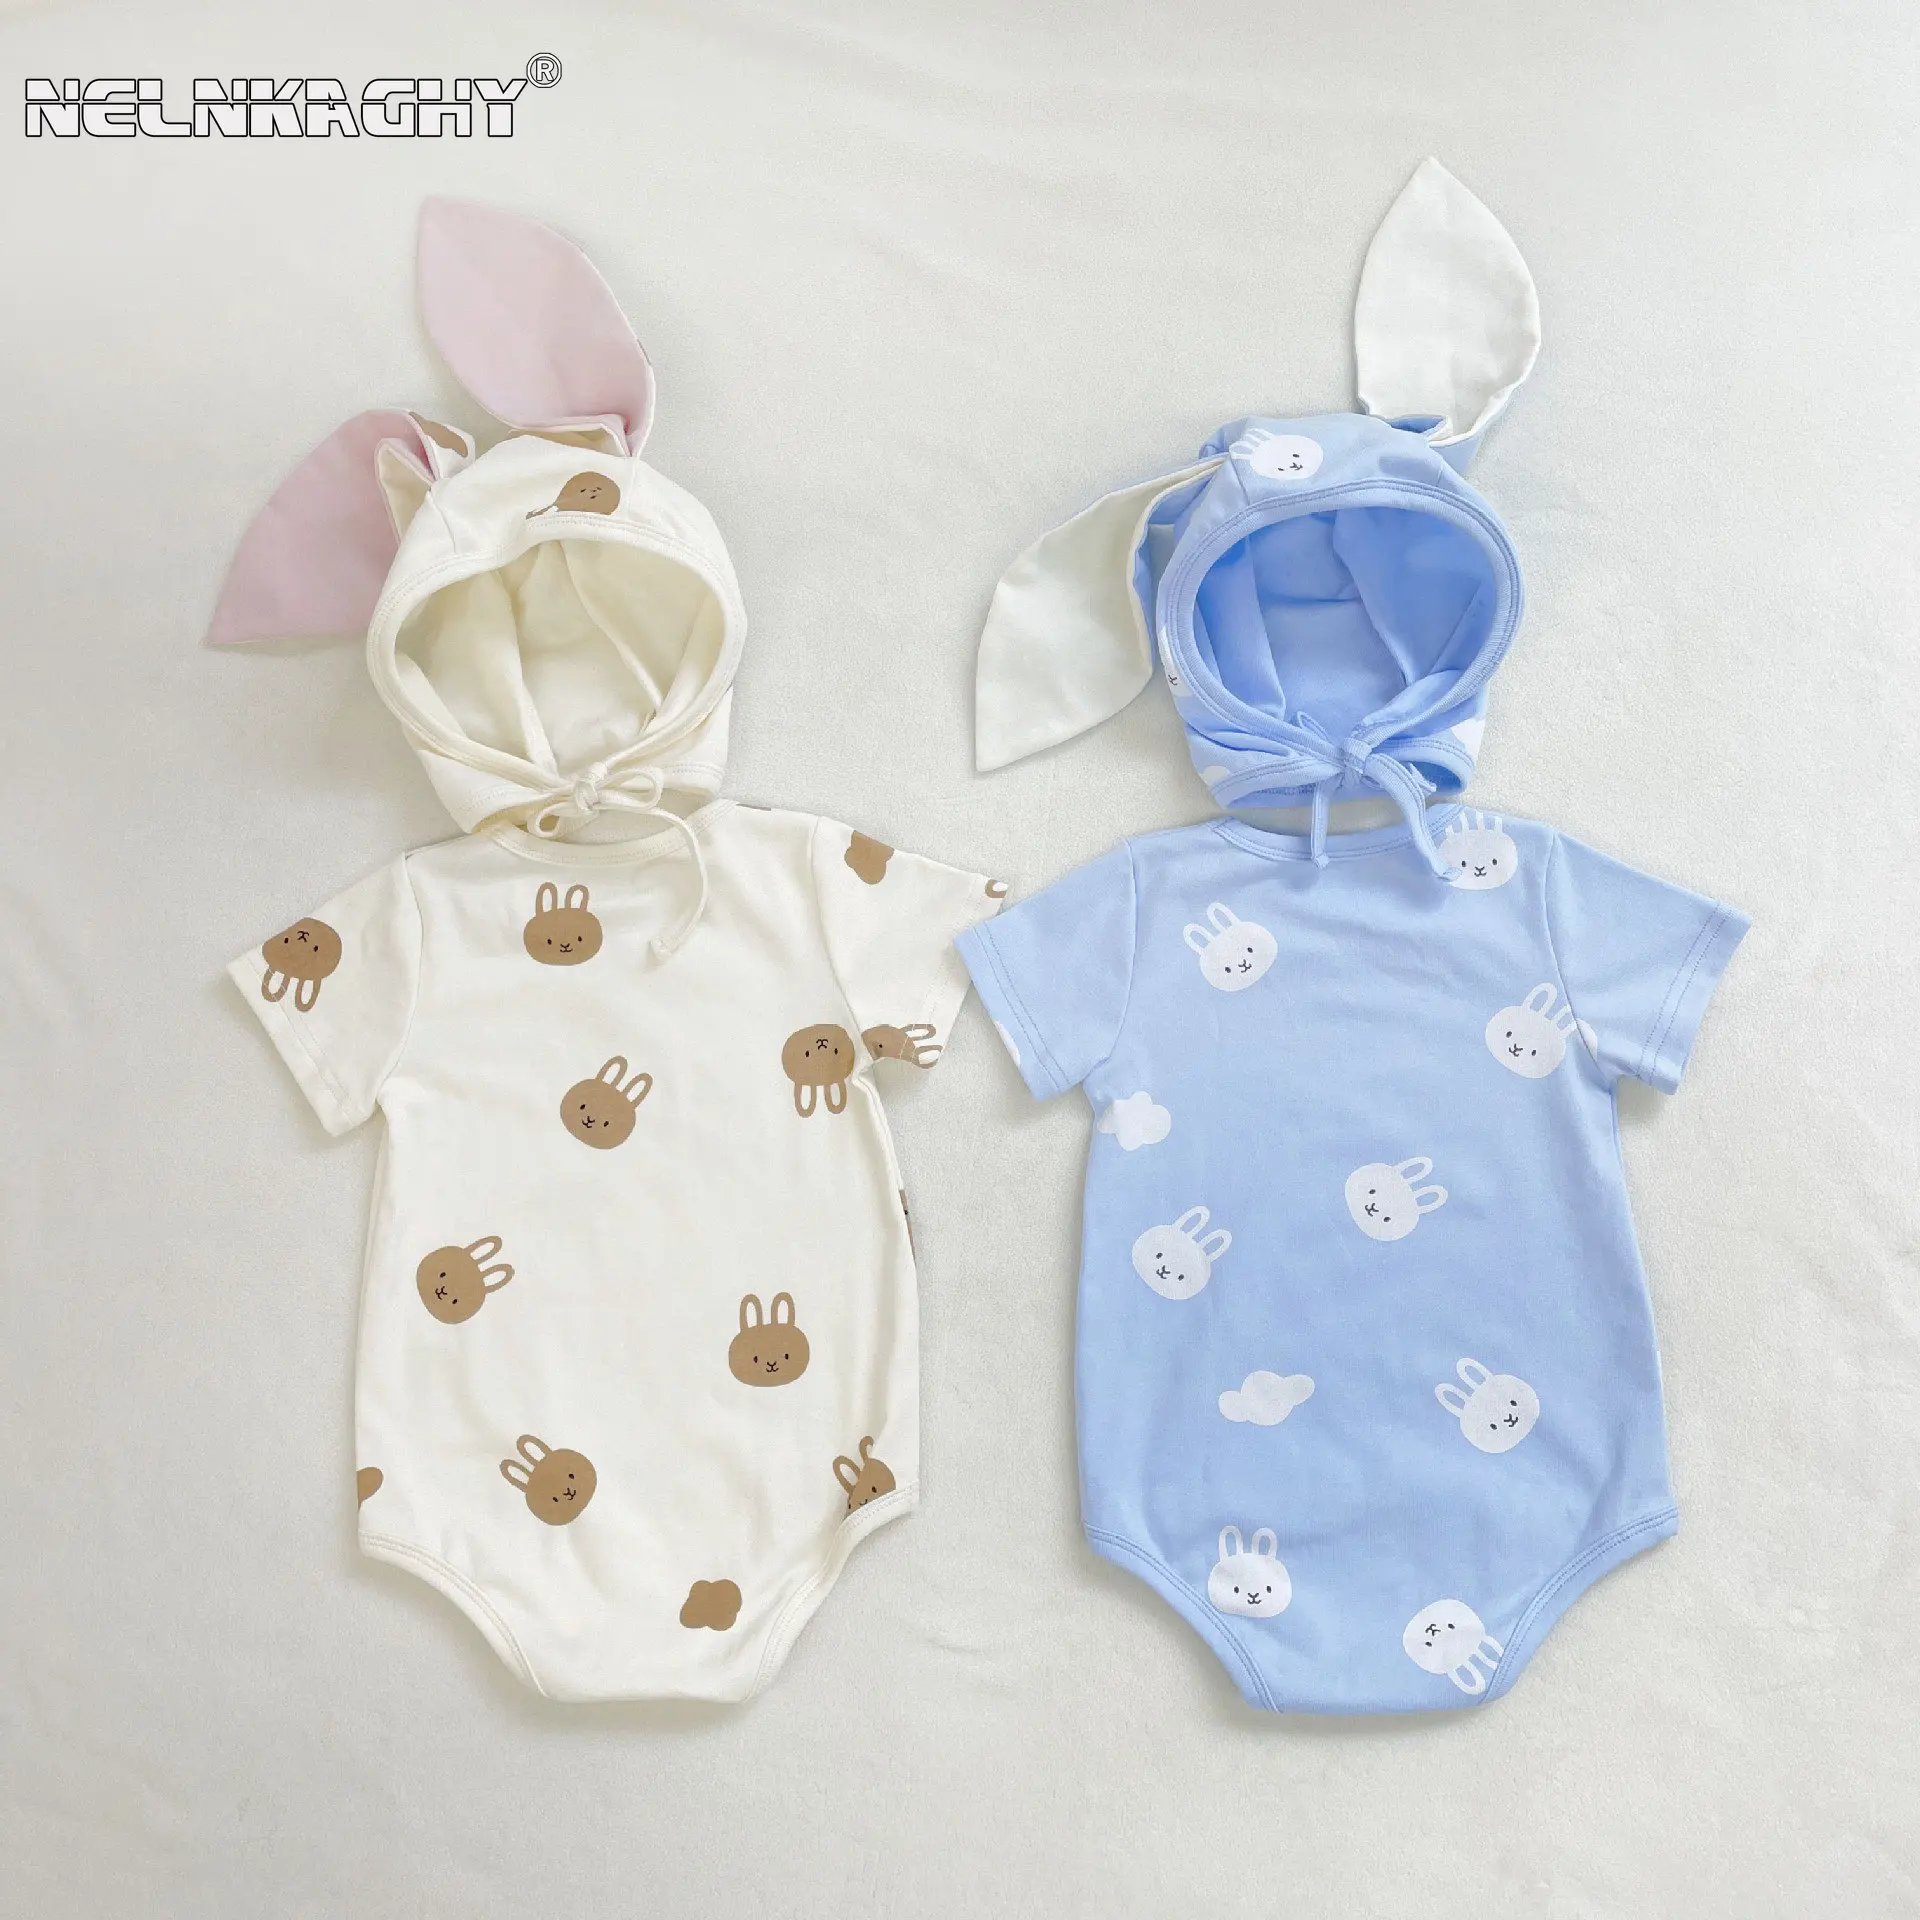 

Cute Cartoon Bunny One-Piece Bodysuits+Hat Set for Newborns Toddlers, Infant Kids Baby 95% Cotton Clothes - Perfect Summer!